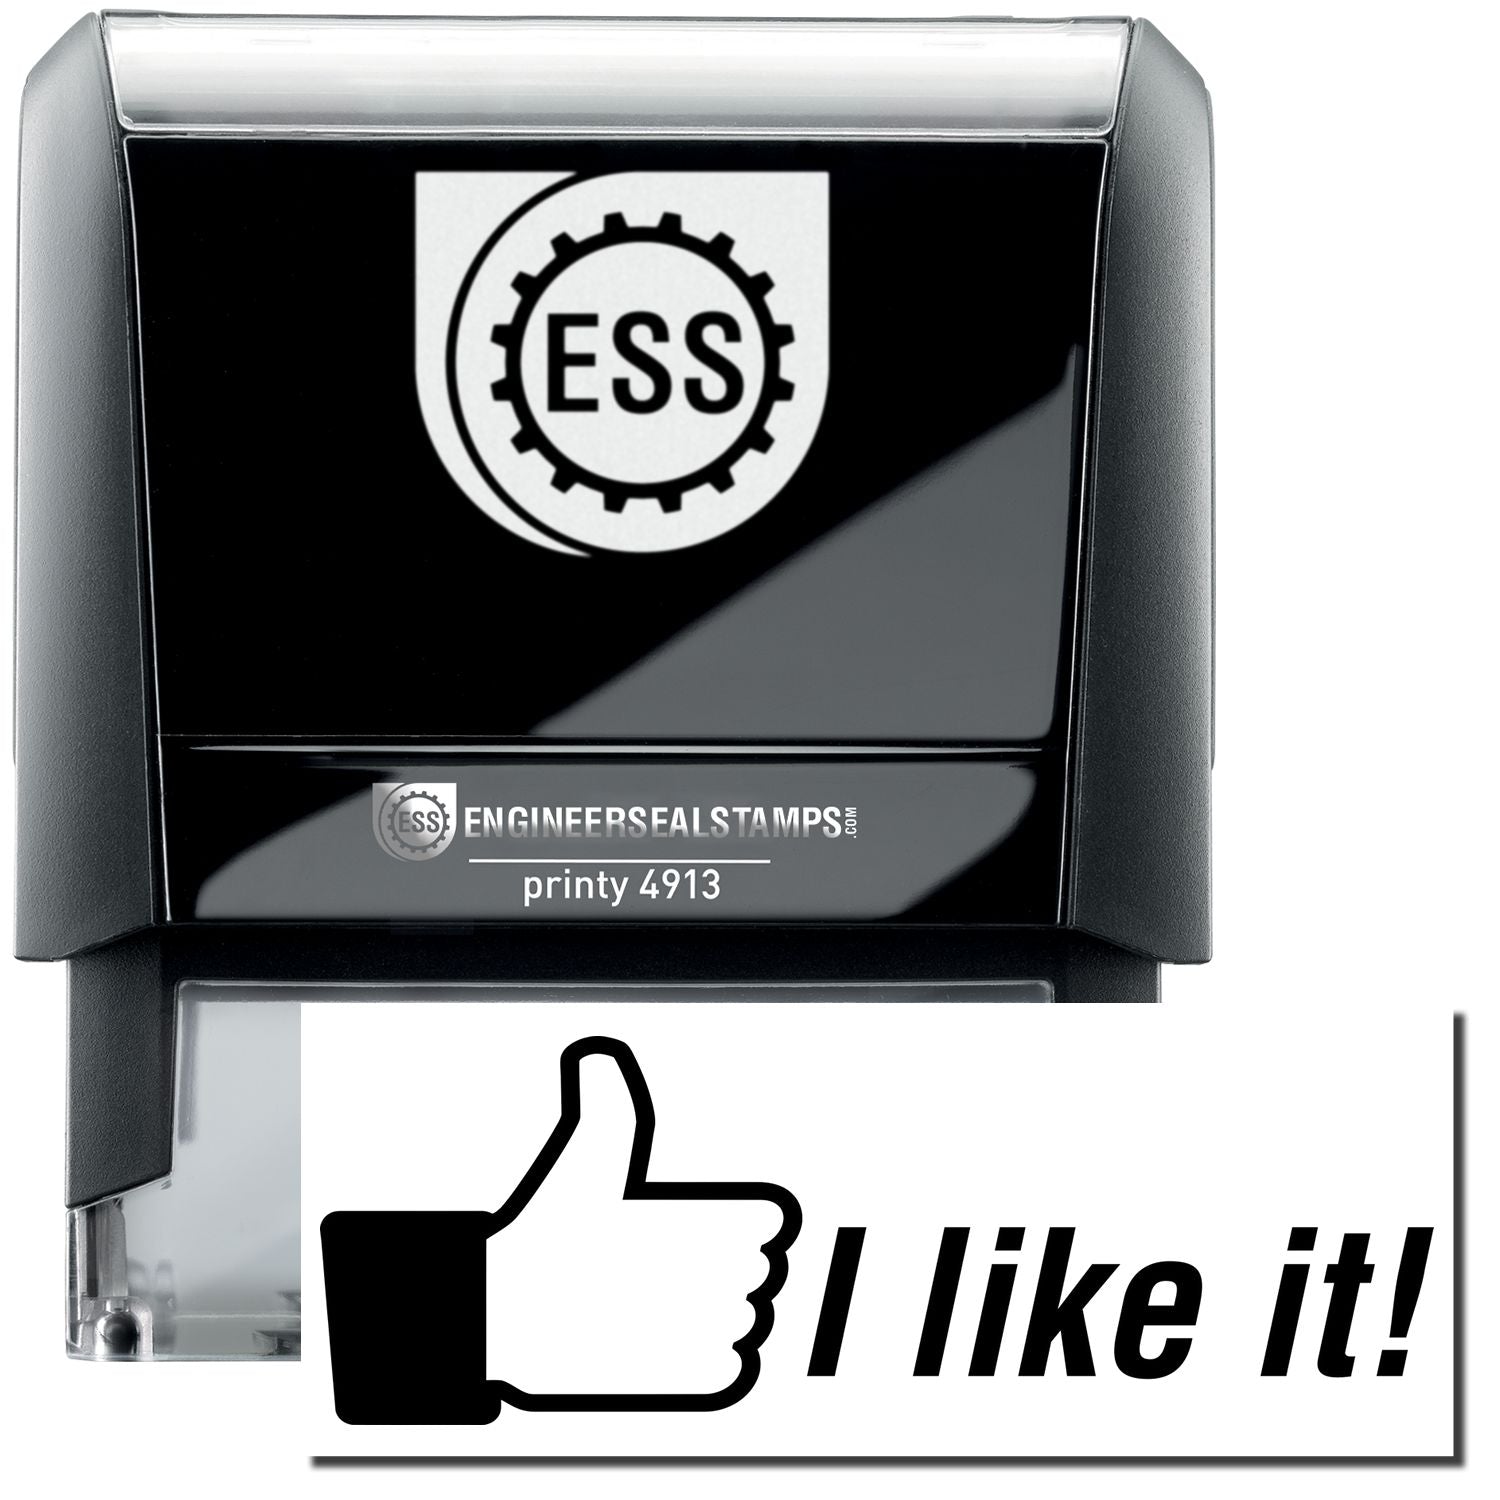 A self-inking stamp with a stamped image showing how the text "I like it!" in a large italic font with a thumbs-up icon on the left side is displayed after stamping.